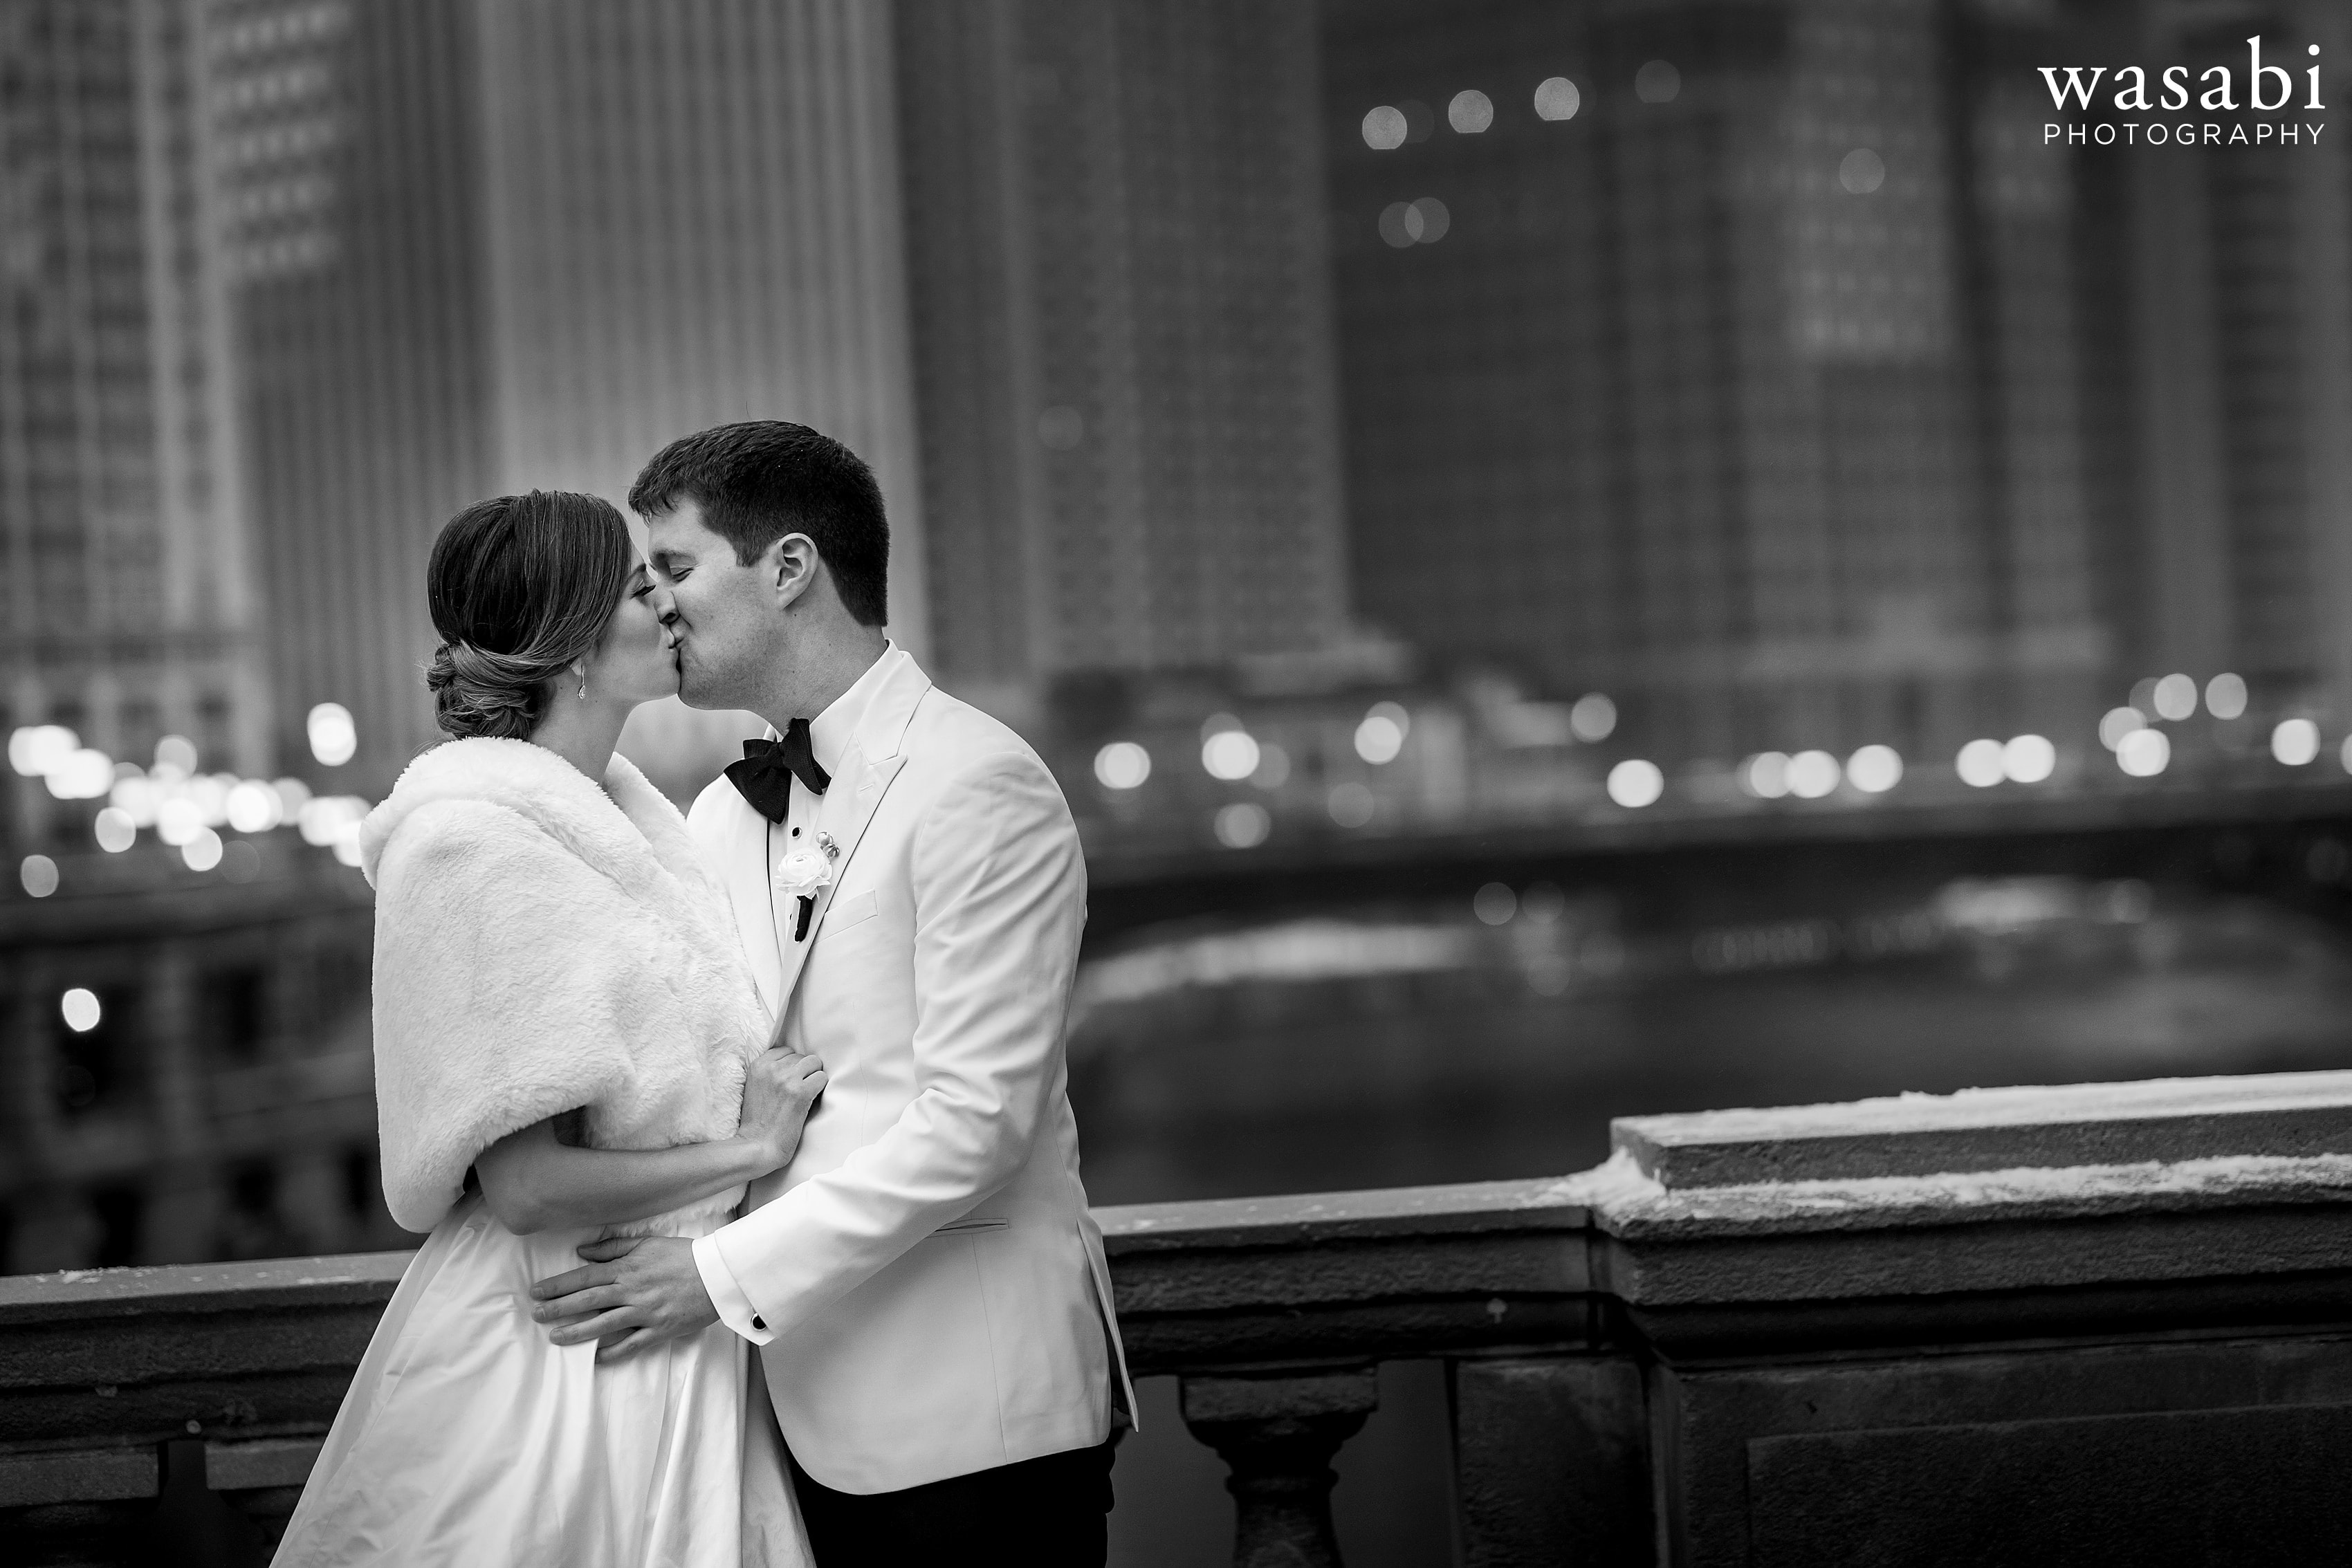 Bride and groom kiss on Michigan Ave. Bridge with Chicago River and skyline in background